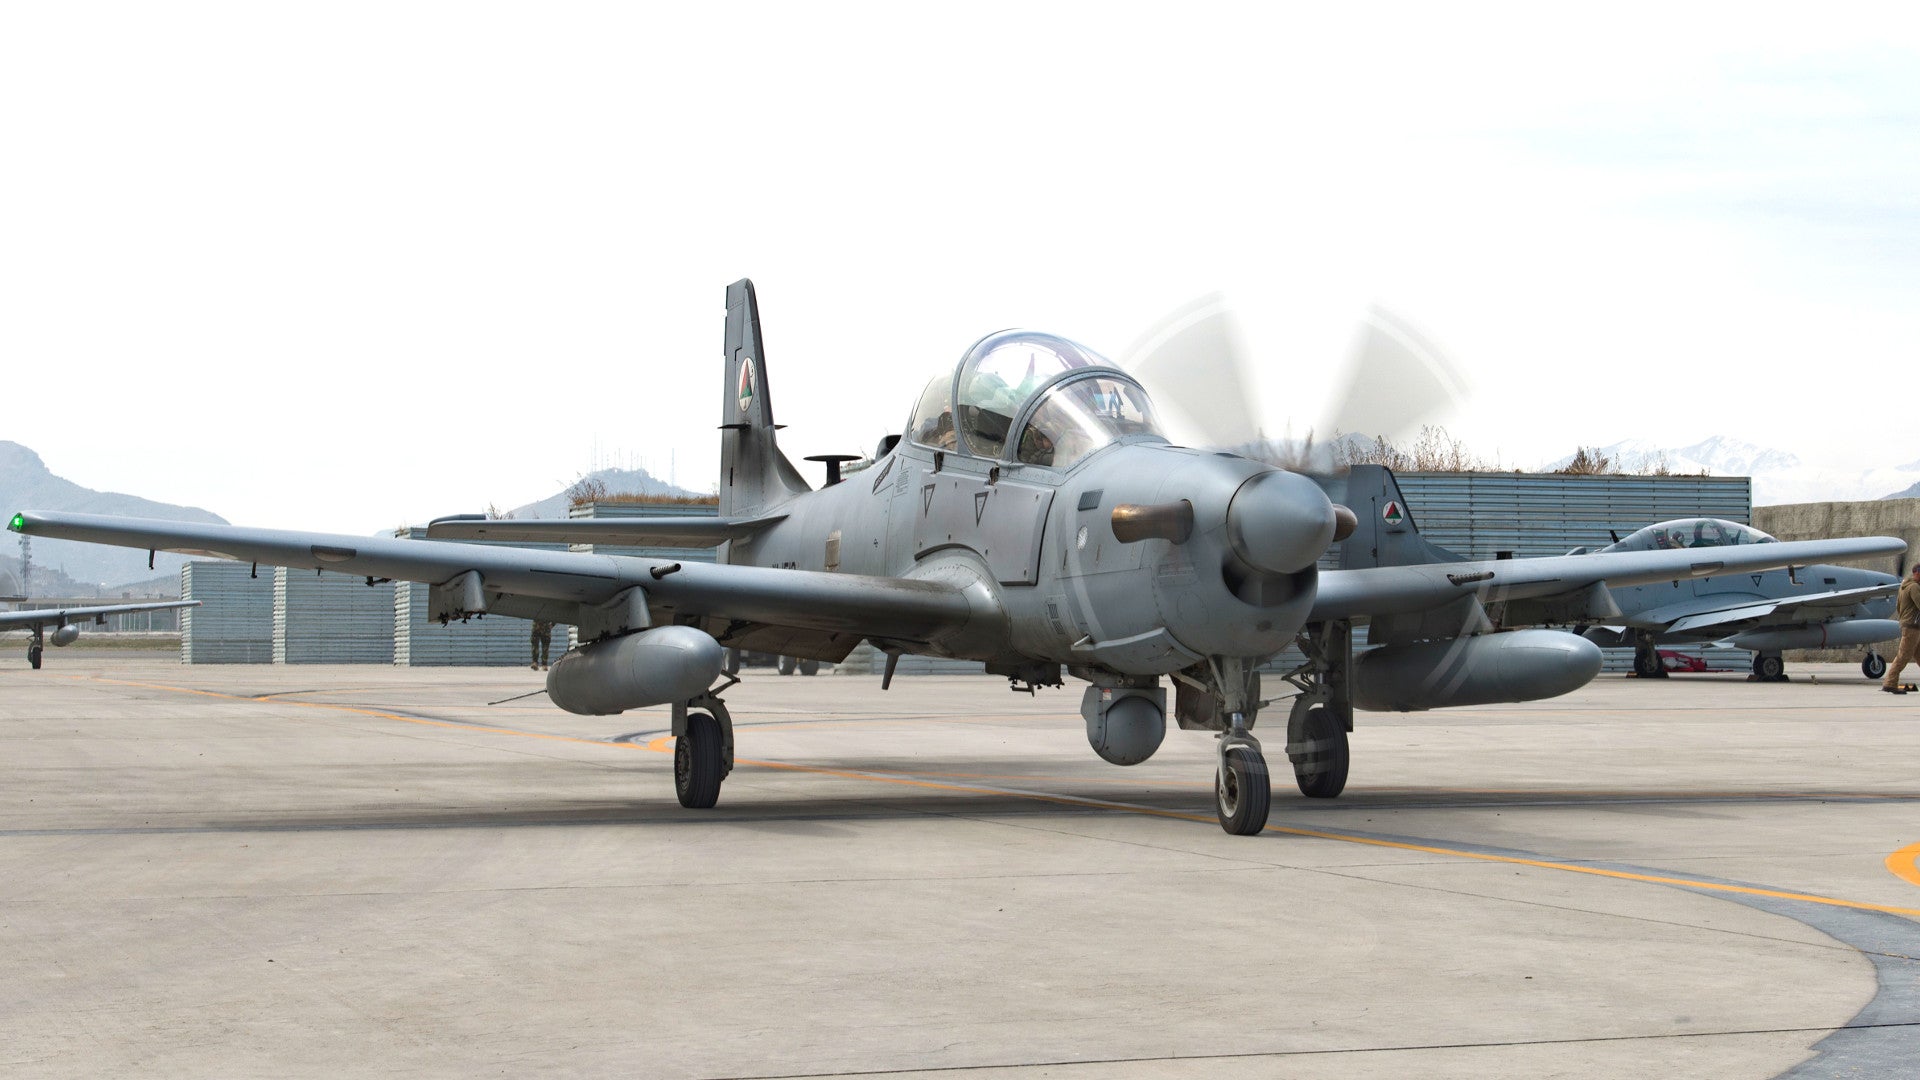 USAF Says It Could Speed Up Buying Light Attack Aircraft, But Doesn’t Have an Actual Plan